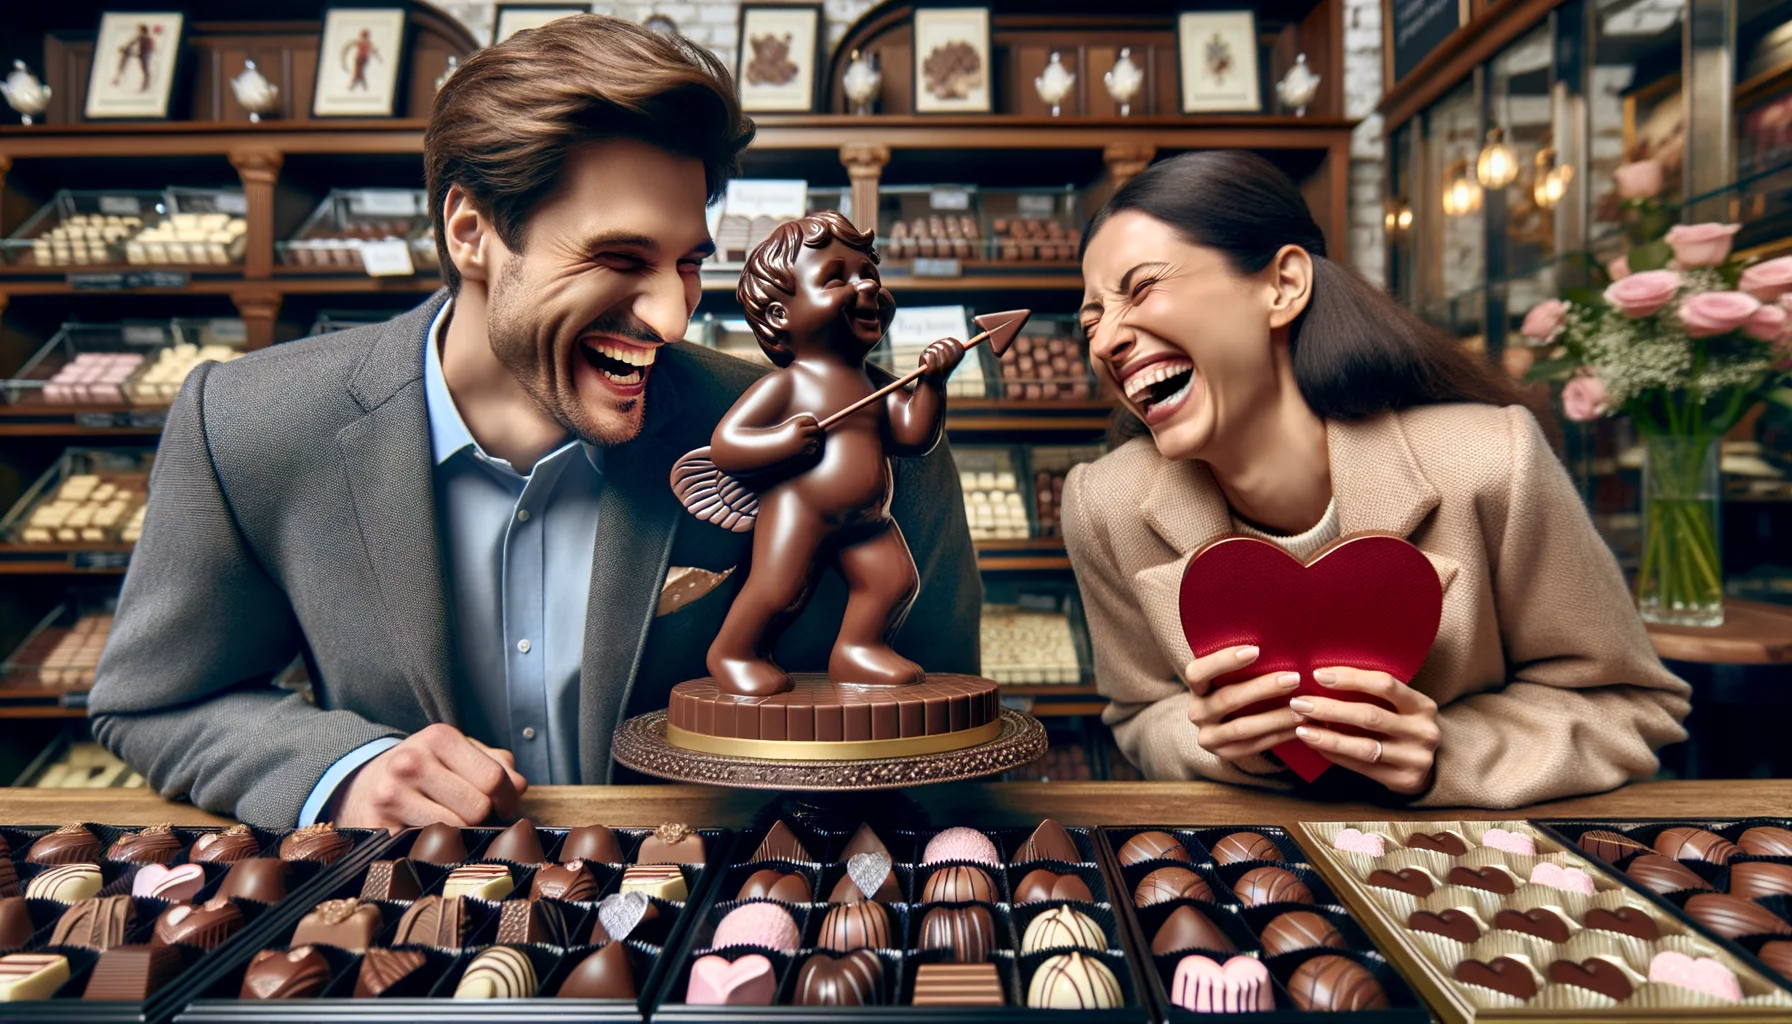 Visualize a lighthearted and humor-filled realistic image of a couple in the scene for buying valentine's day chocolates. The scenario includes an elegant chocolate shop with rows of luxurious chocolates nicely displayed. The couple, a Caucasian man and a Hispanic woman, are bursting into laughter at a chocolate sculpture that humorously, and somewhat absurdly, depicts a cupid with an oversized heart. The man is looking at the woman with a playful smirk, as if he's just made a joke about it, and she's holding a box of other fine chocolates, giggling at his wittiness.